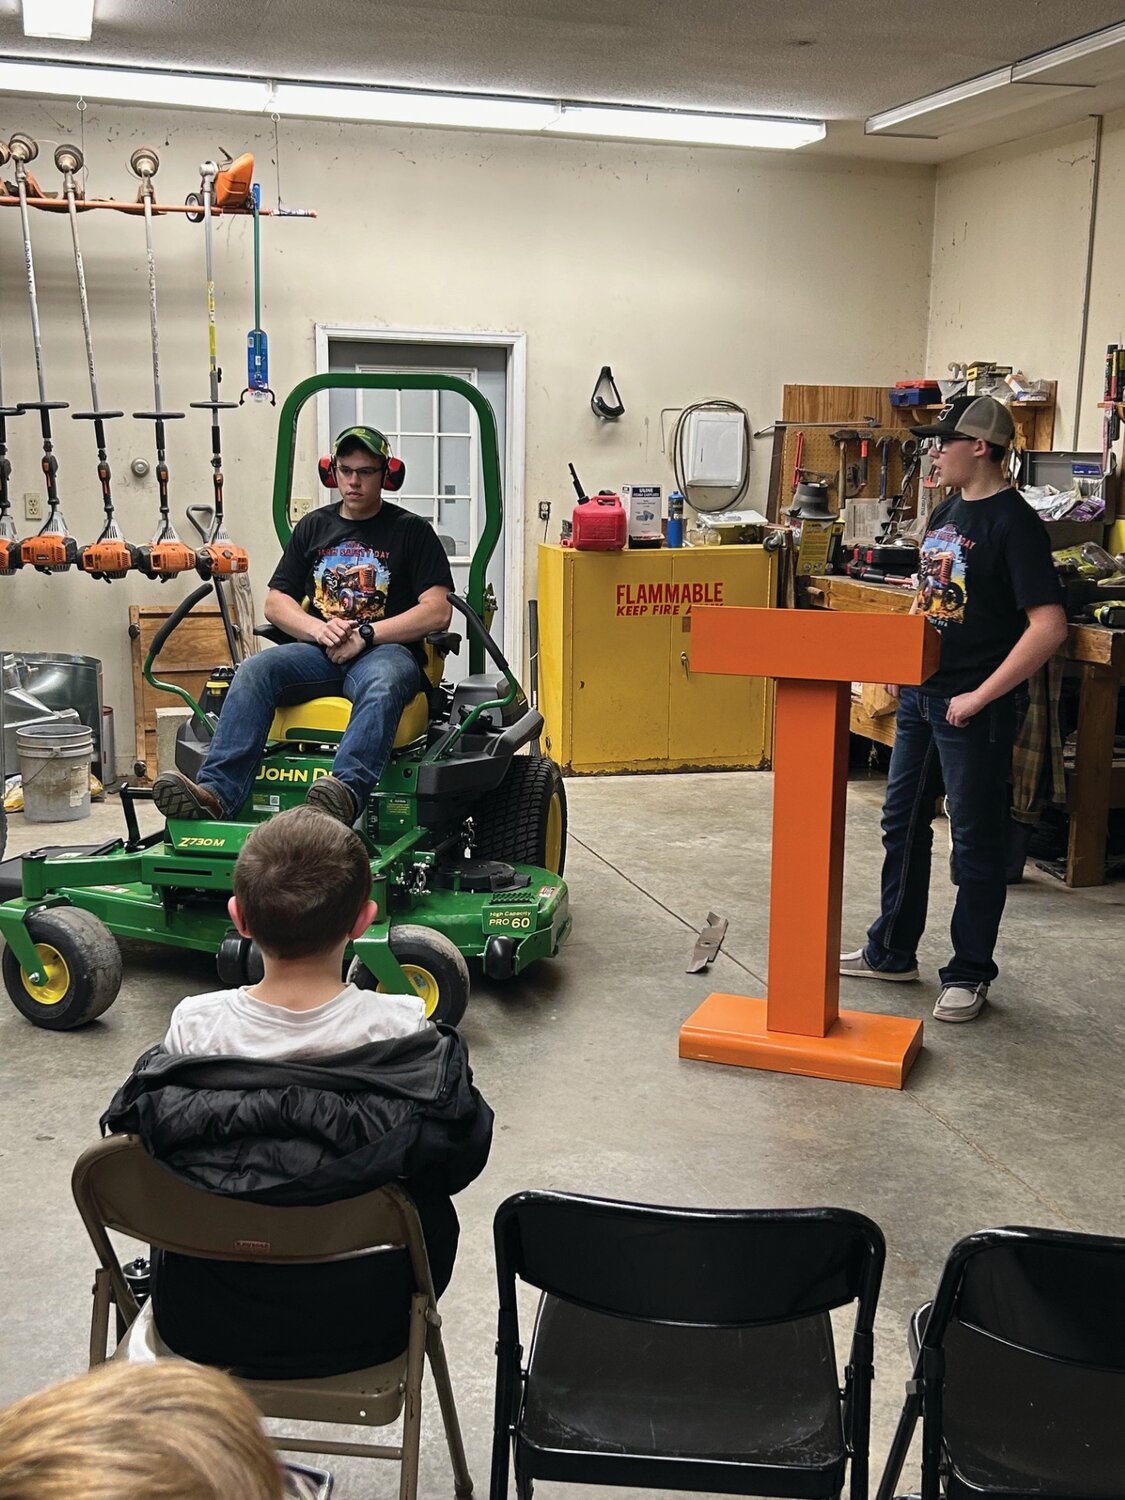 FFA members Israel Rose (left) and Adam Riehle (right) instruct students on motor safety.